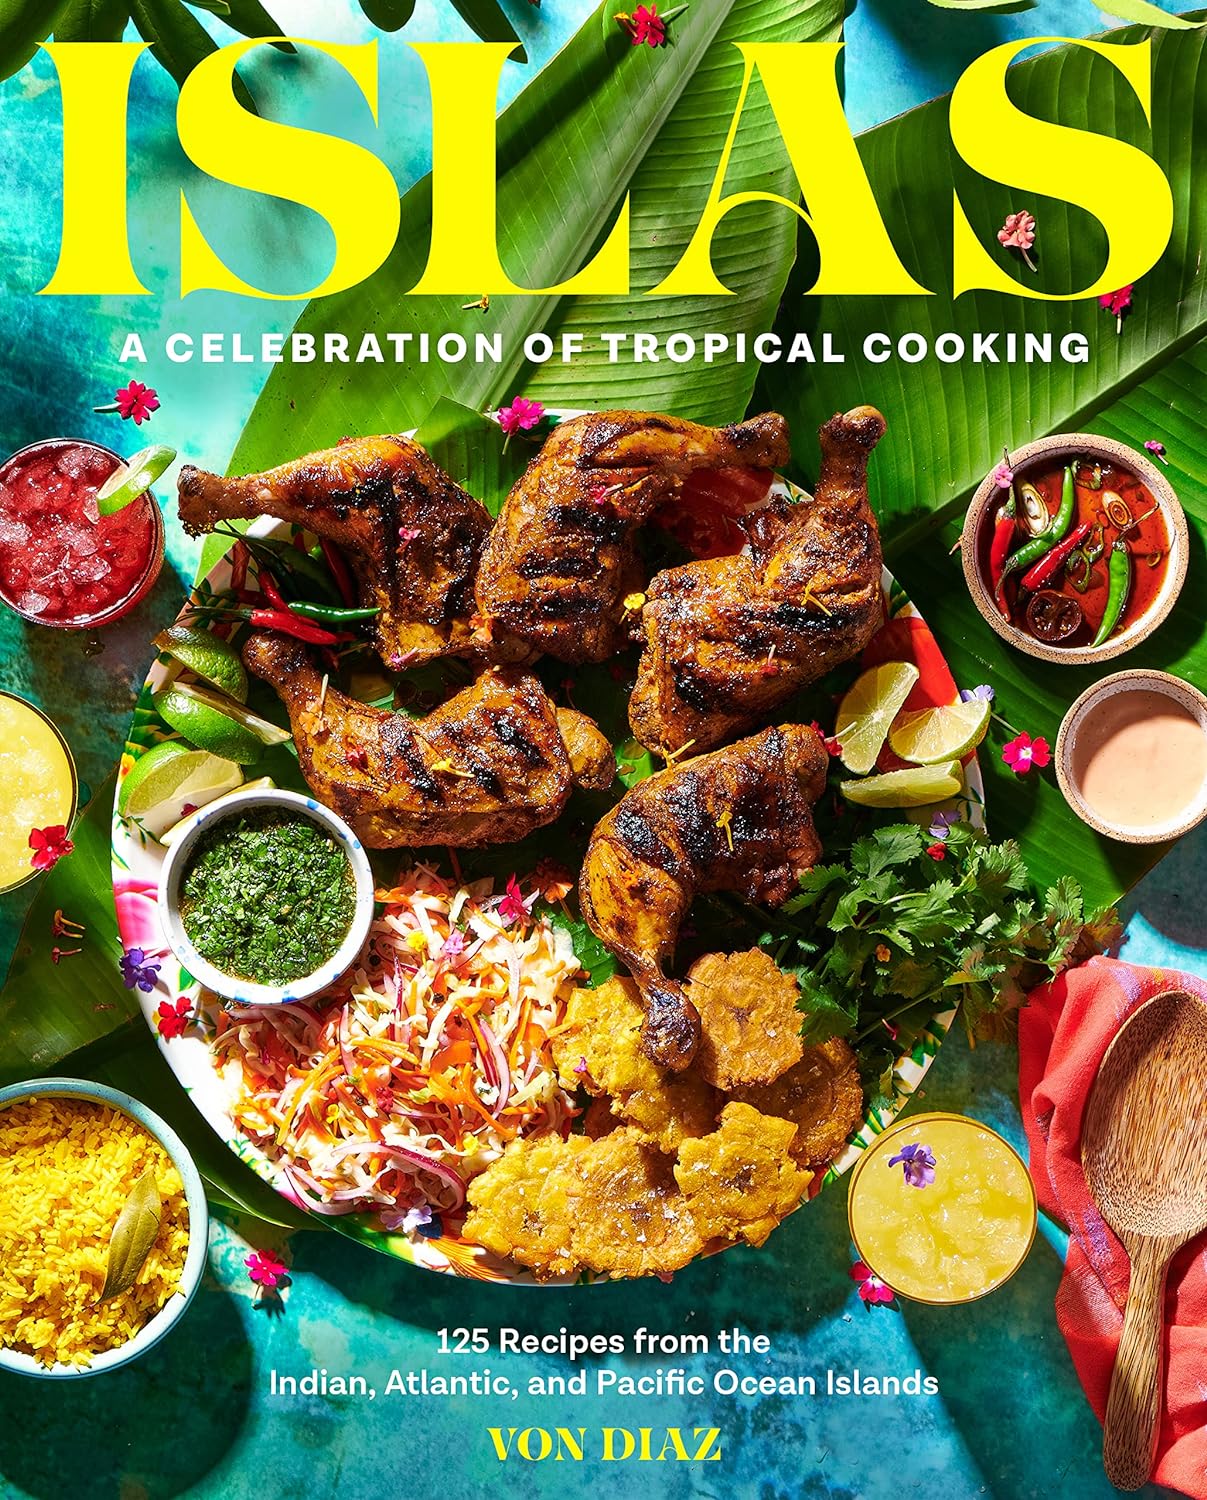 Islas: A Celebration of Tropical Cooking―125 Recipes from the Indian, Atlantic, and Pacific Ocean Islands (Von Diaz)